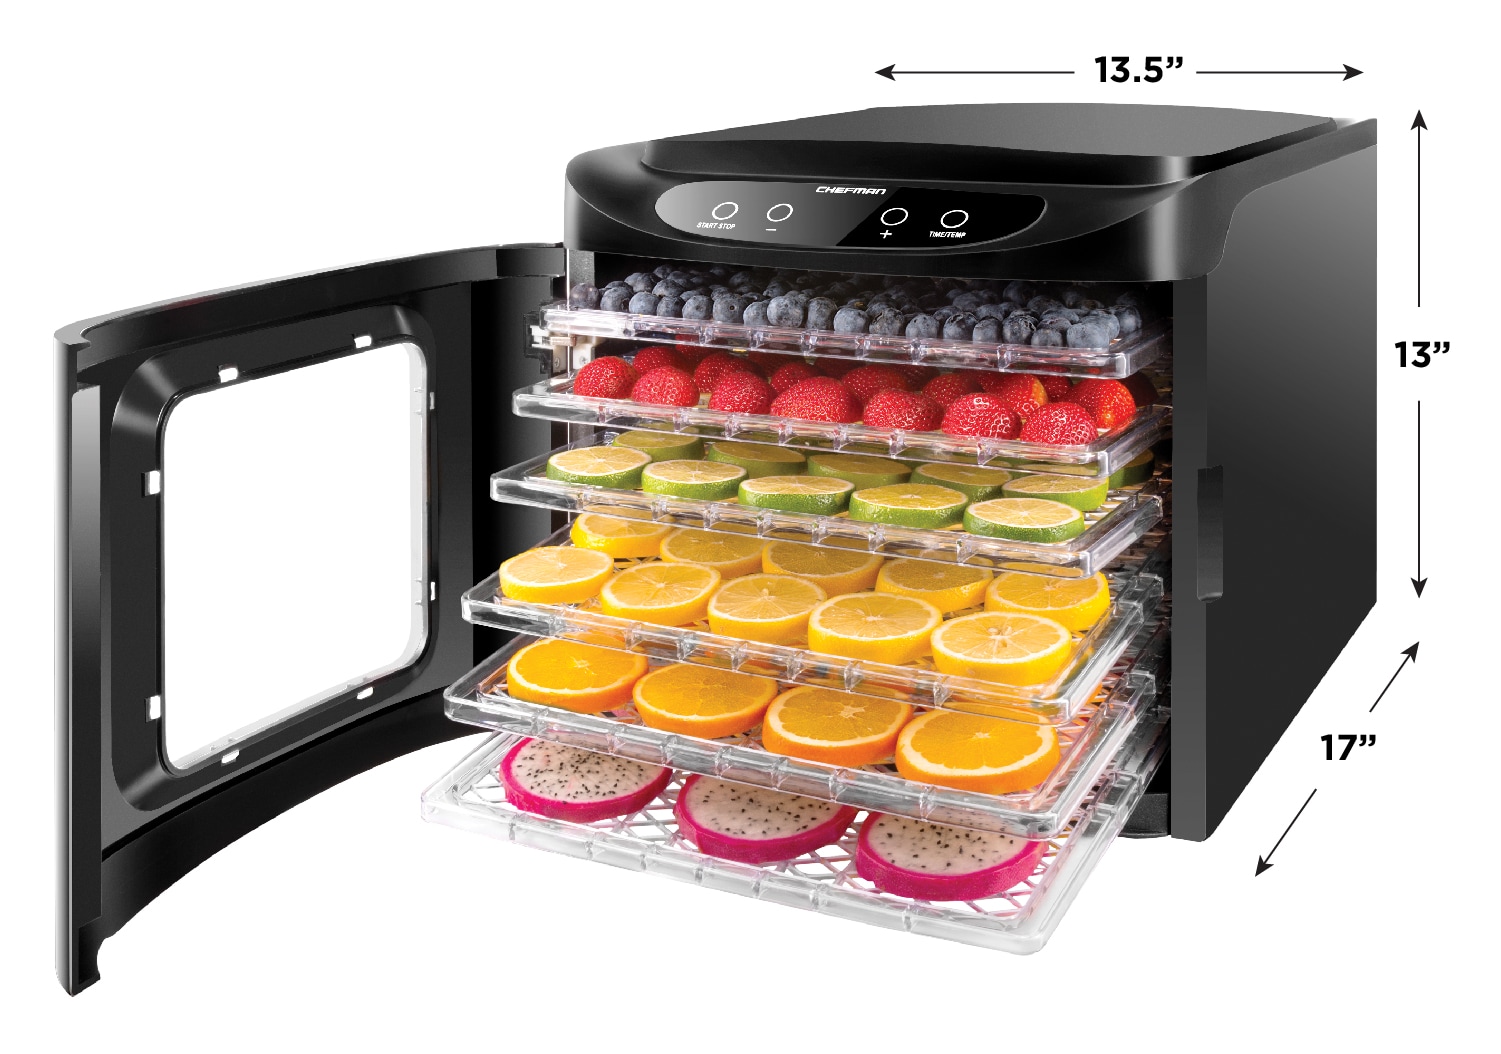 Ivation Powerful 6-Tray Food Dehydrator, Programmable